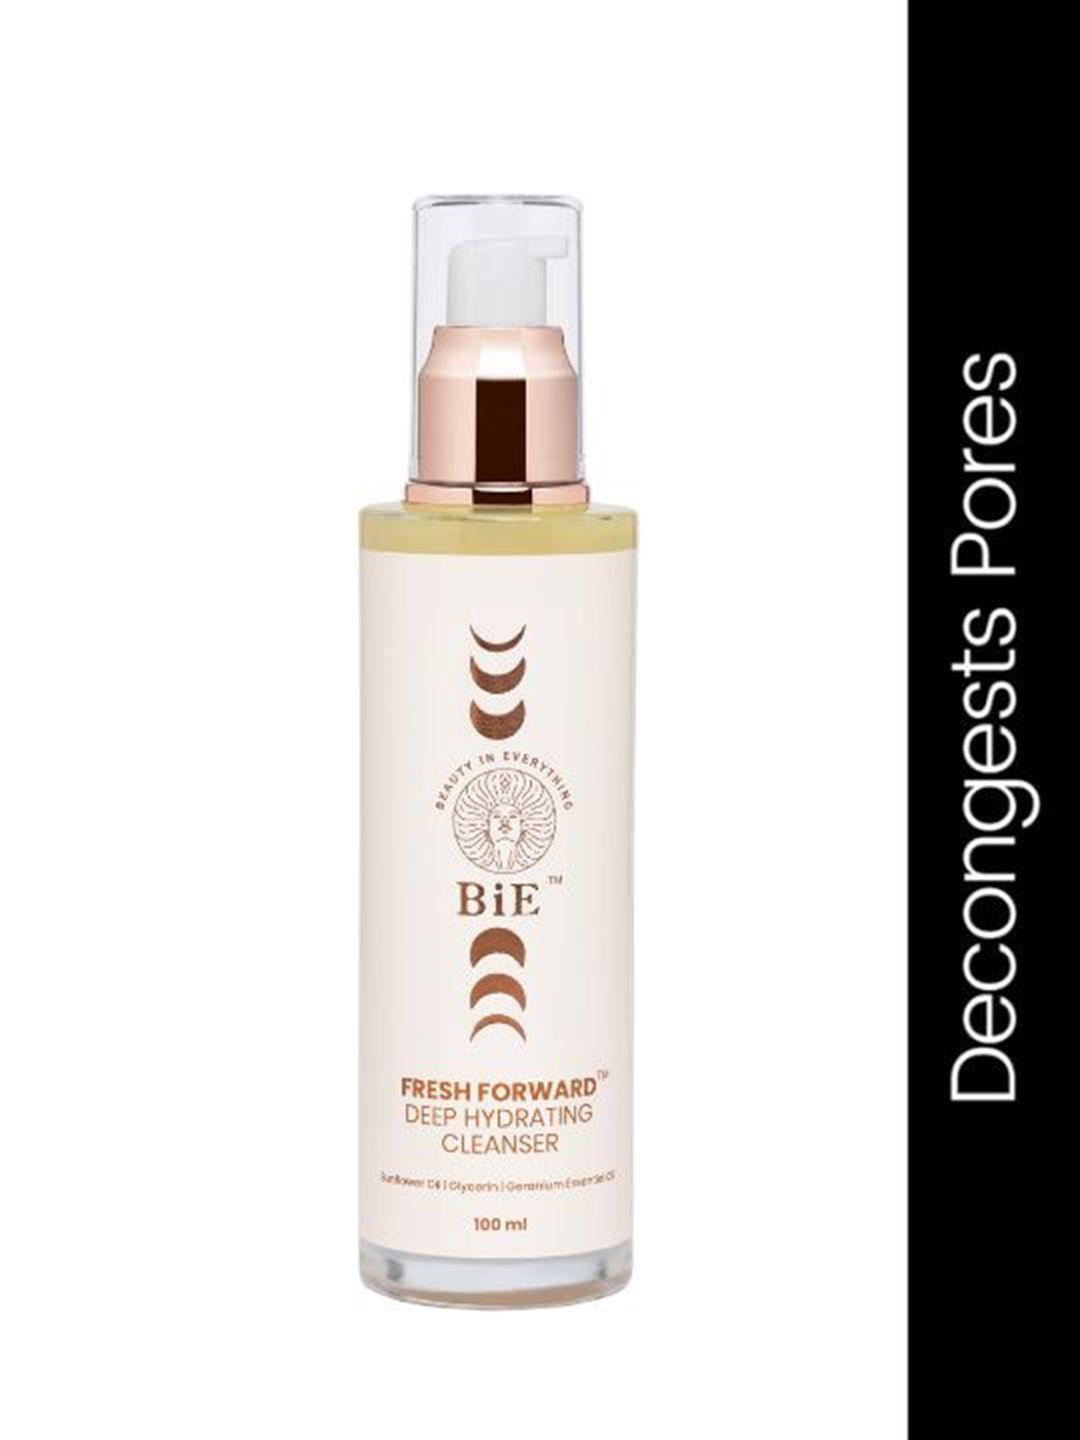 bie- beauty in everything fresh forward deep hydrating cleanser with sunflower oil - 100ml